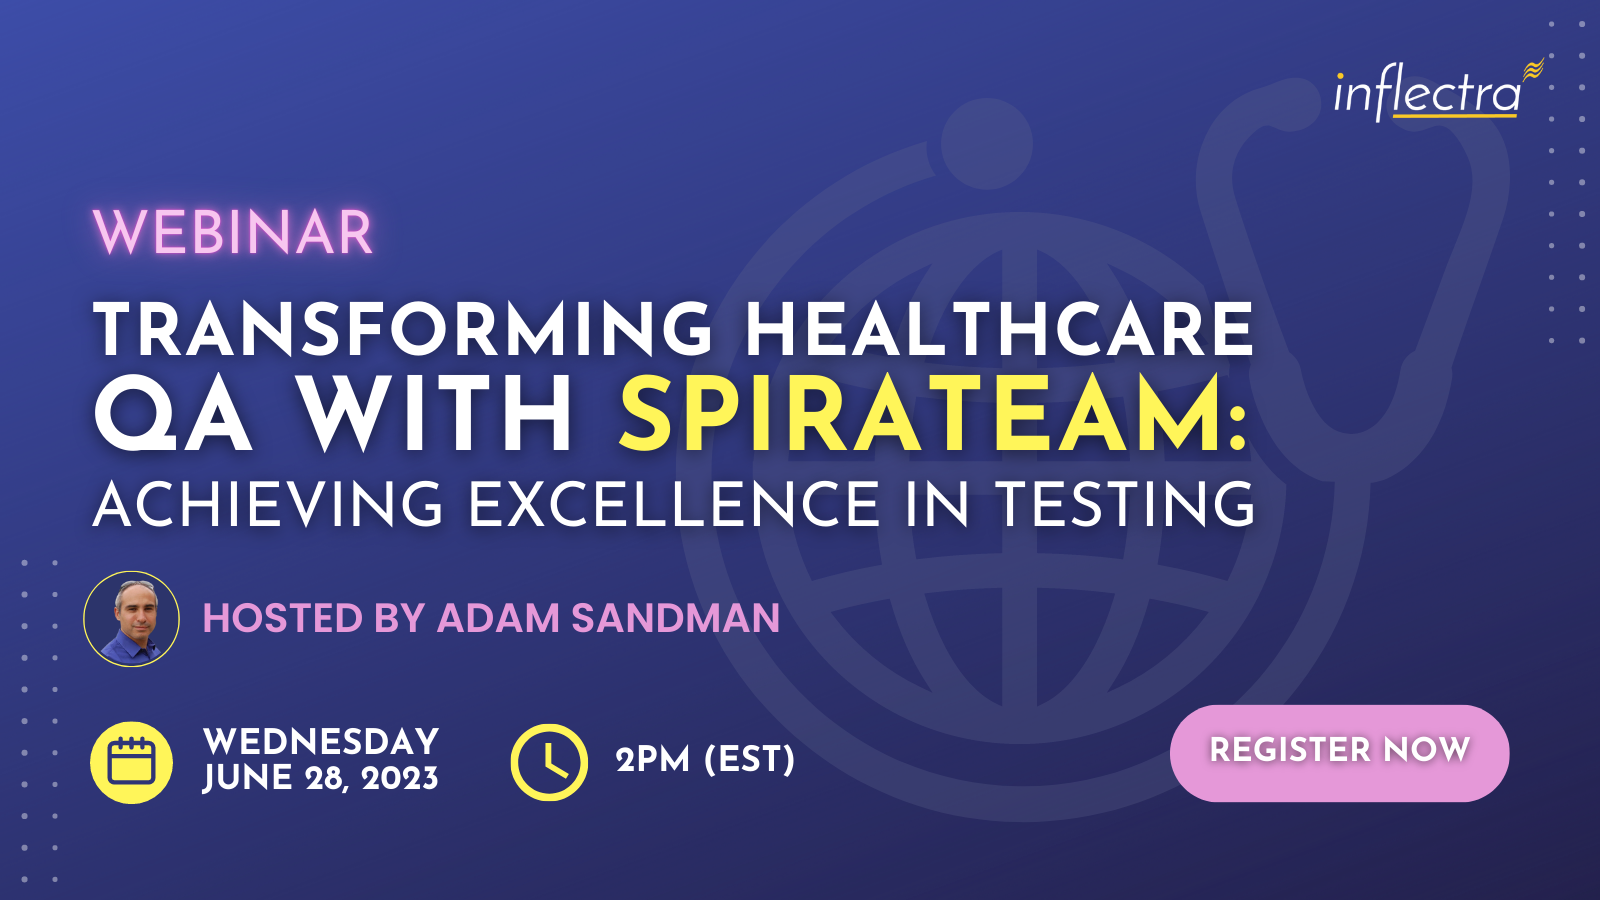 webinar-transforming-healthcare-quality-assurance-with-spirateam-achieving-excellence-in-testing-inflectra-image